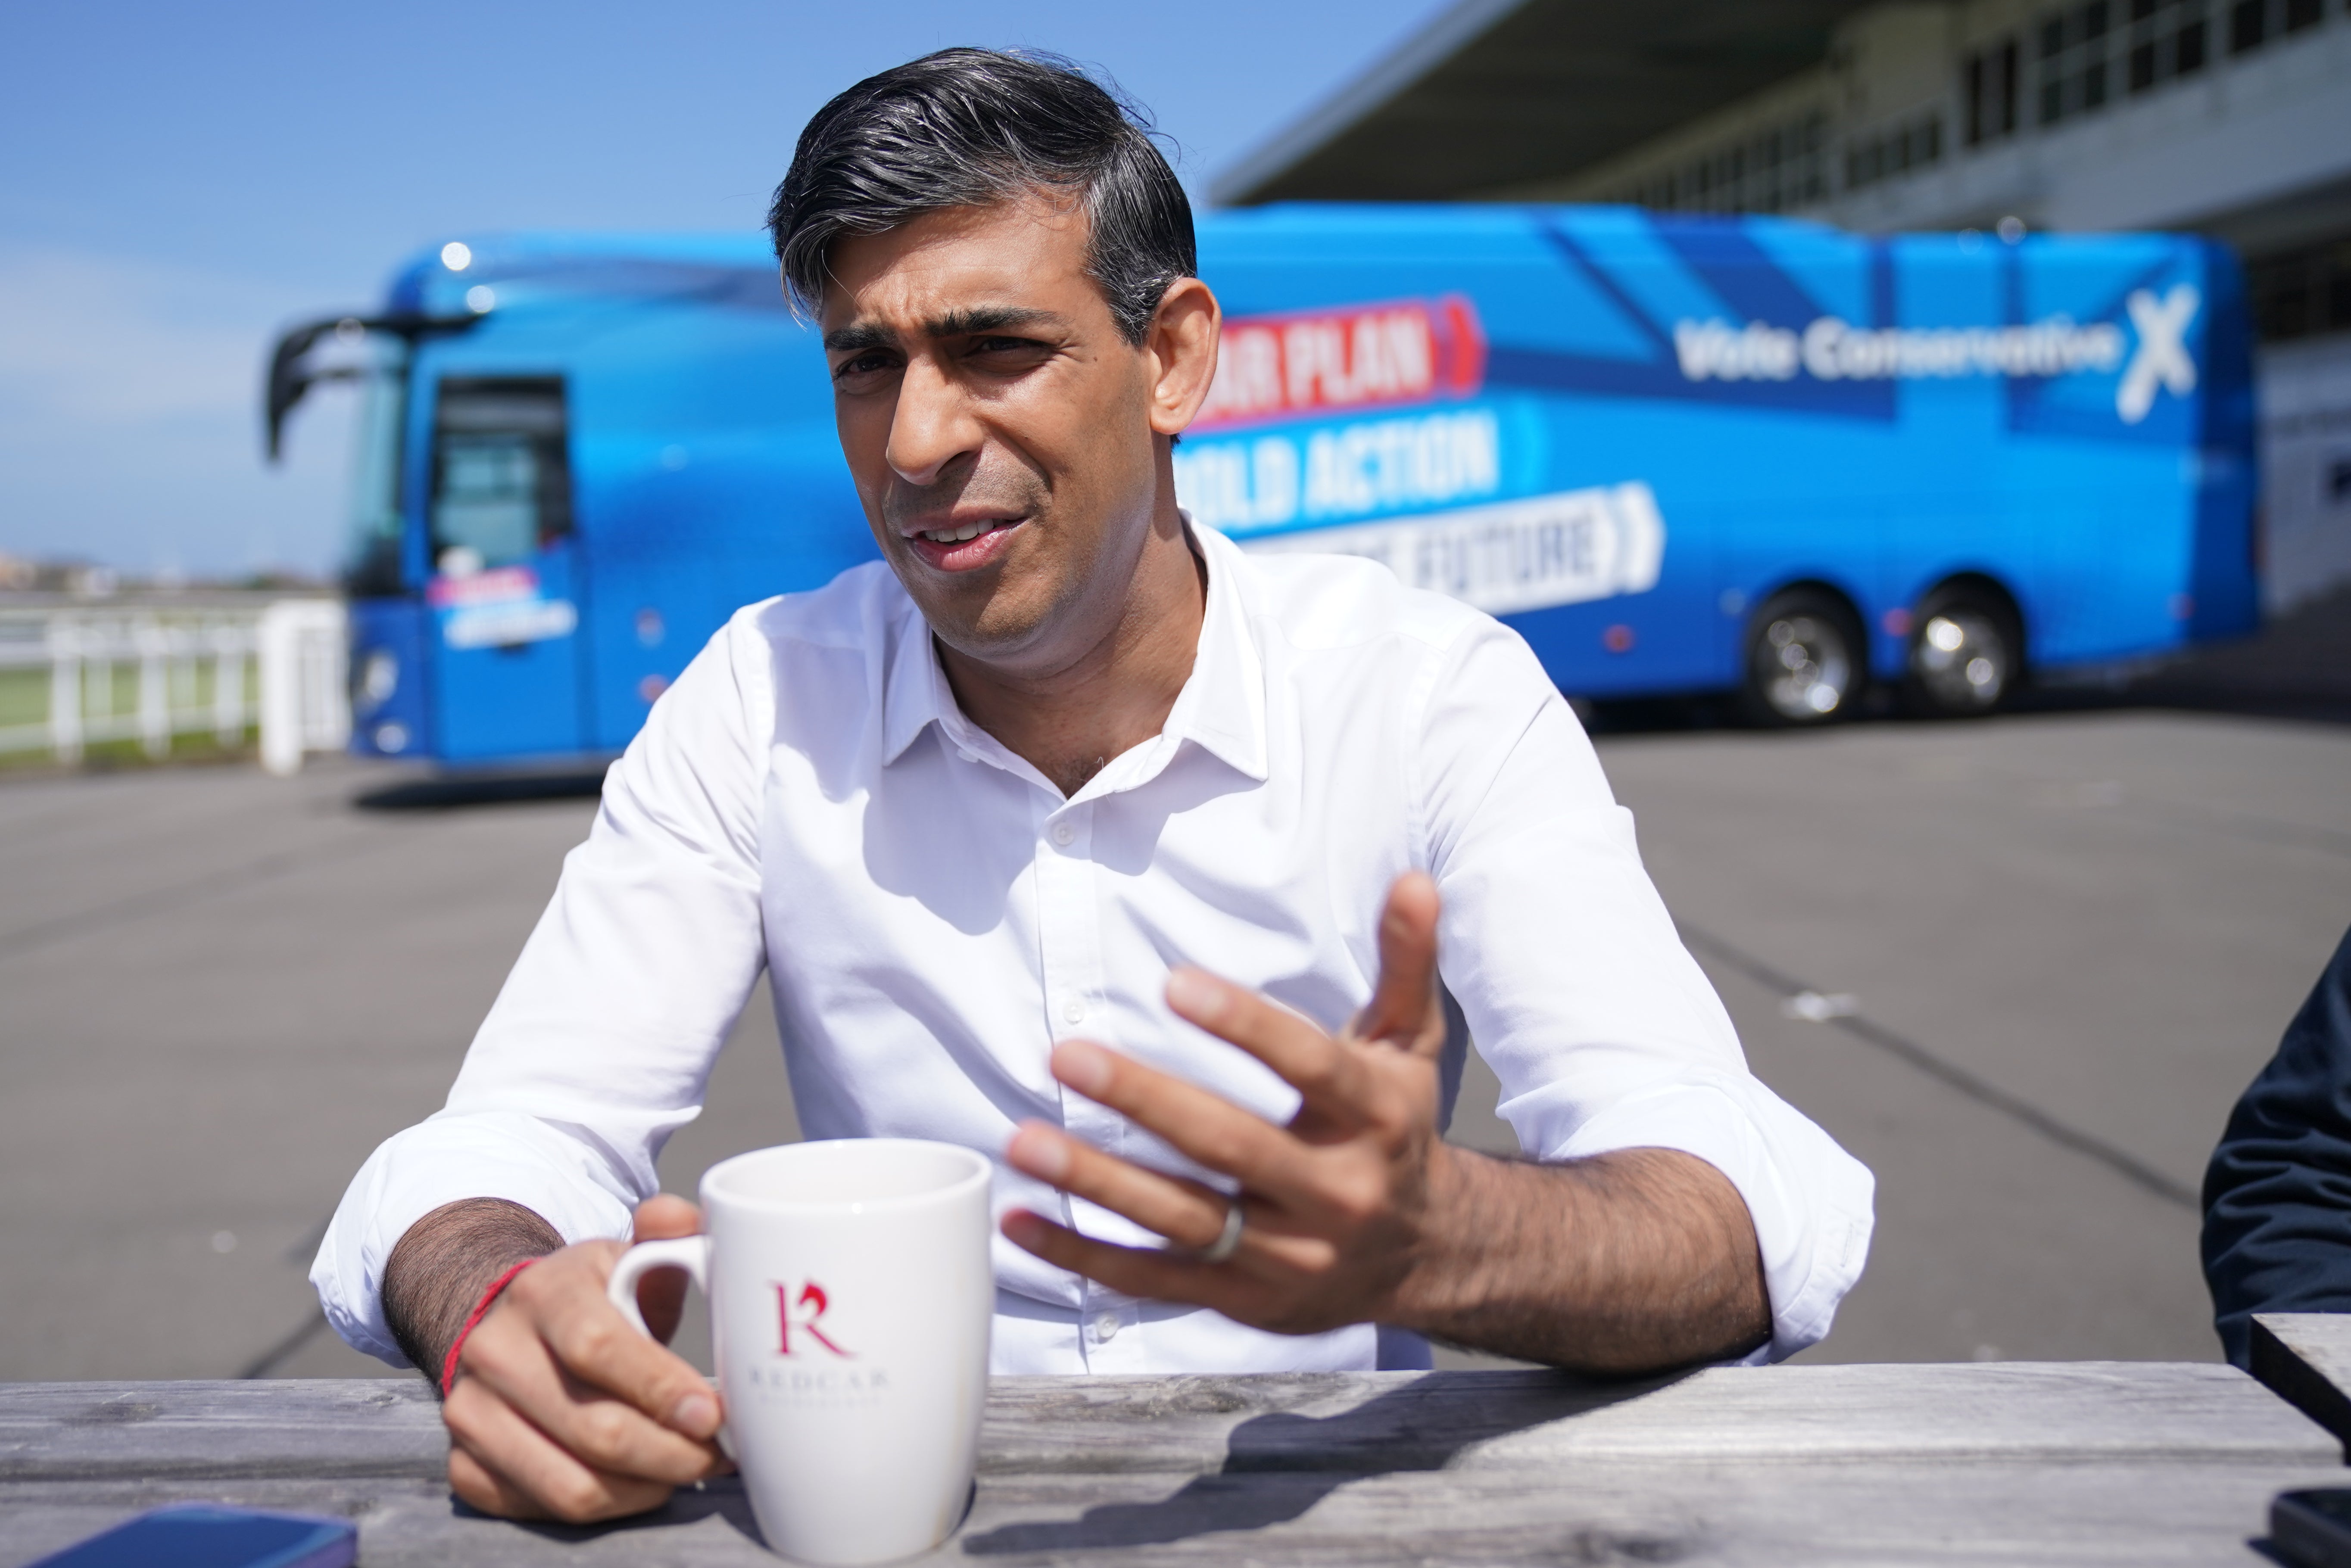 Prime Minister Rishi Sunak speaks to the media at the launch of the Conservative campaign bus at Redcar Racecourse